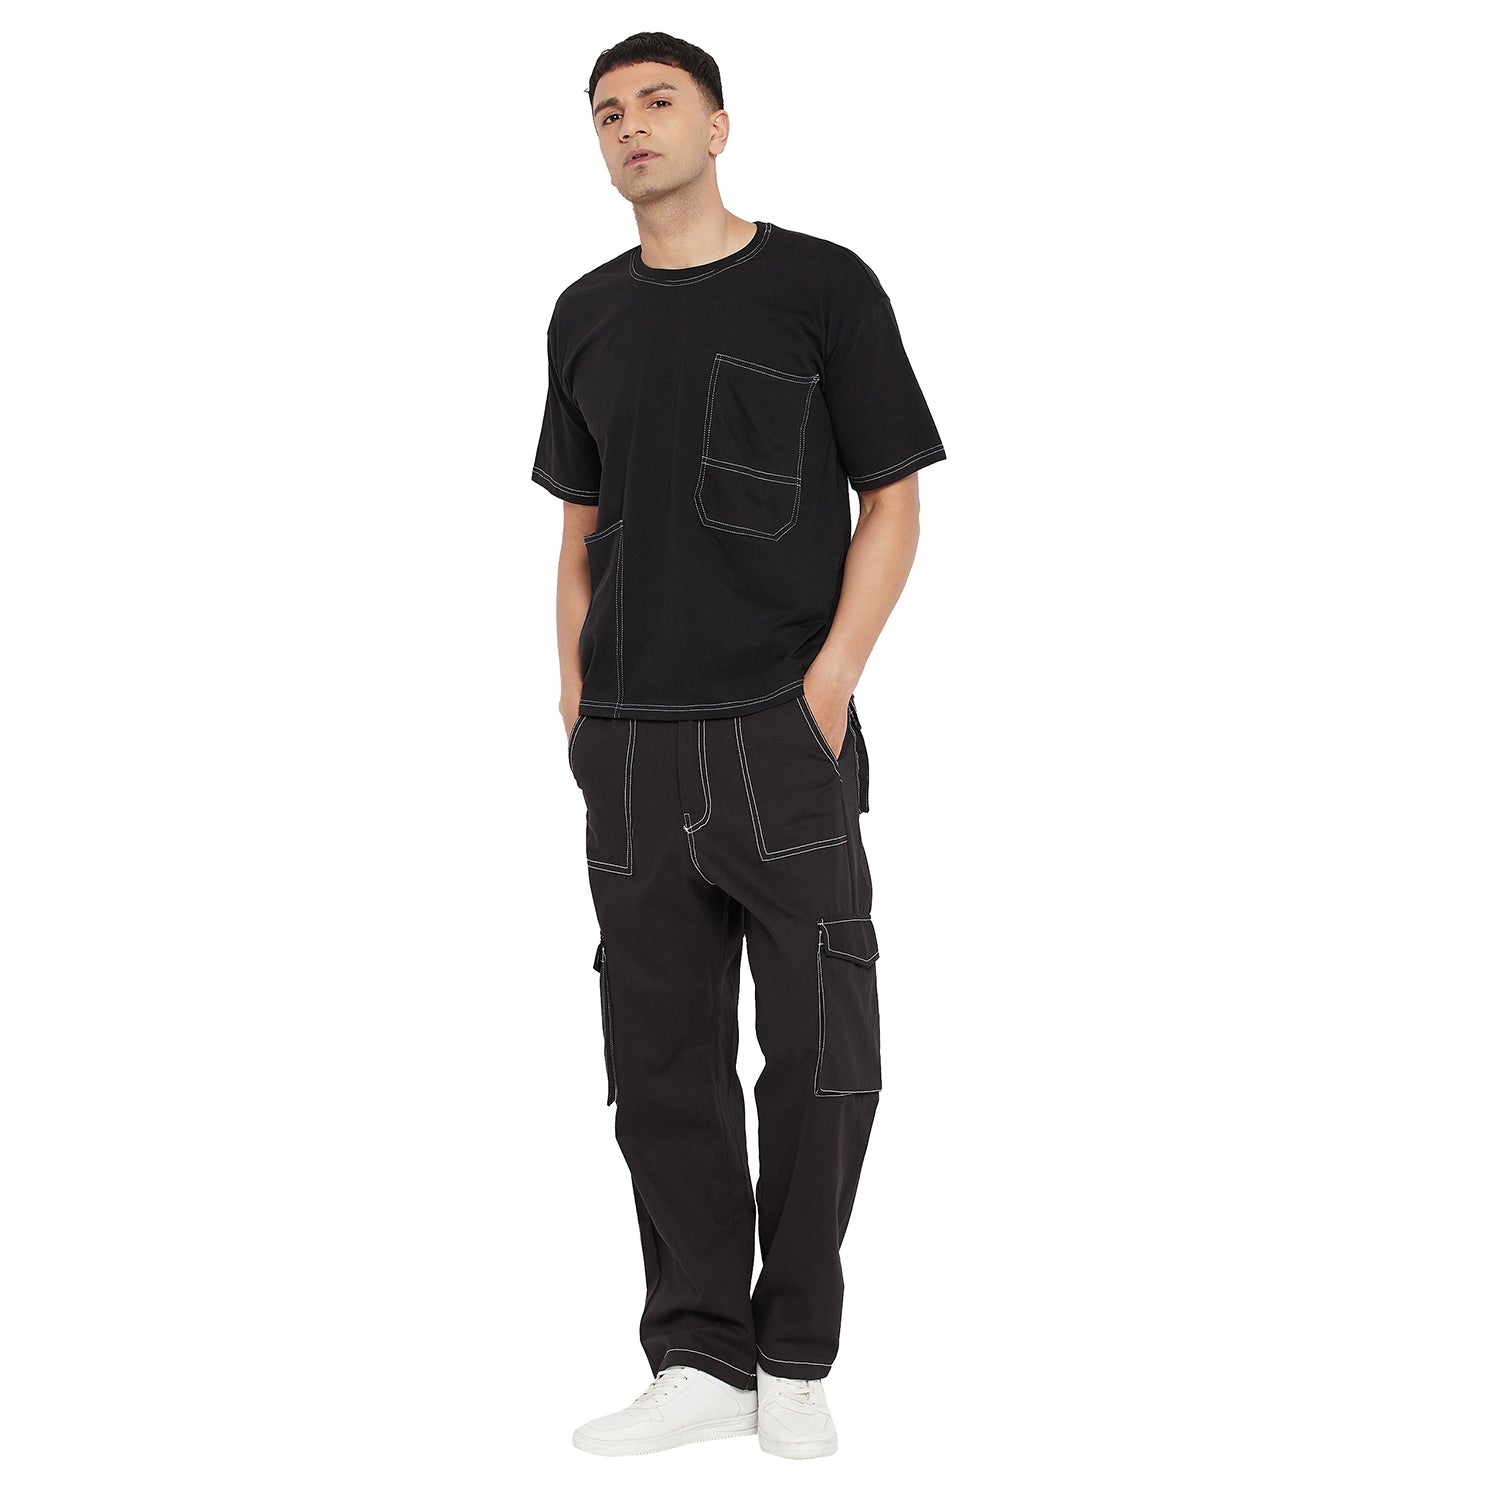 Update 86+ cargo pants with t shirt latest